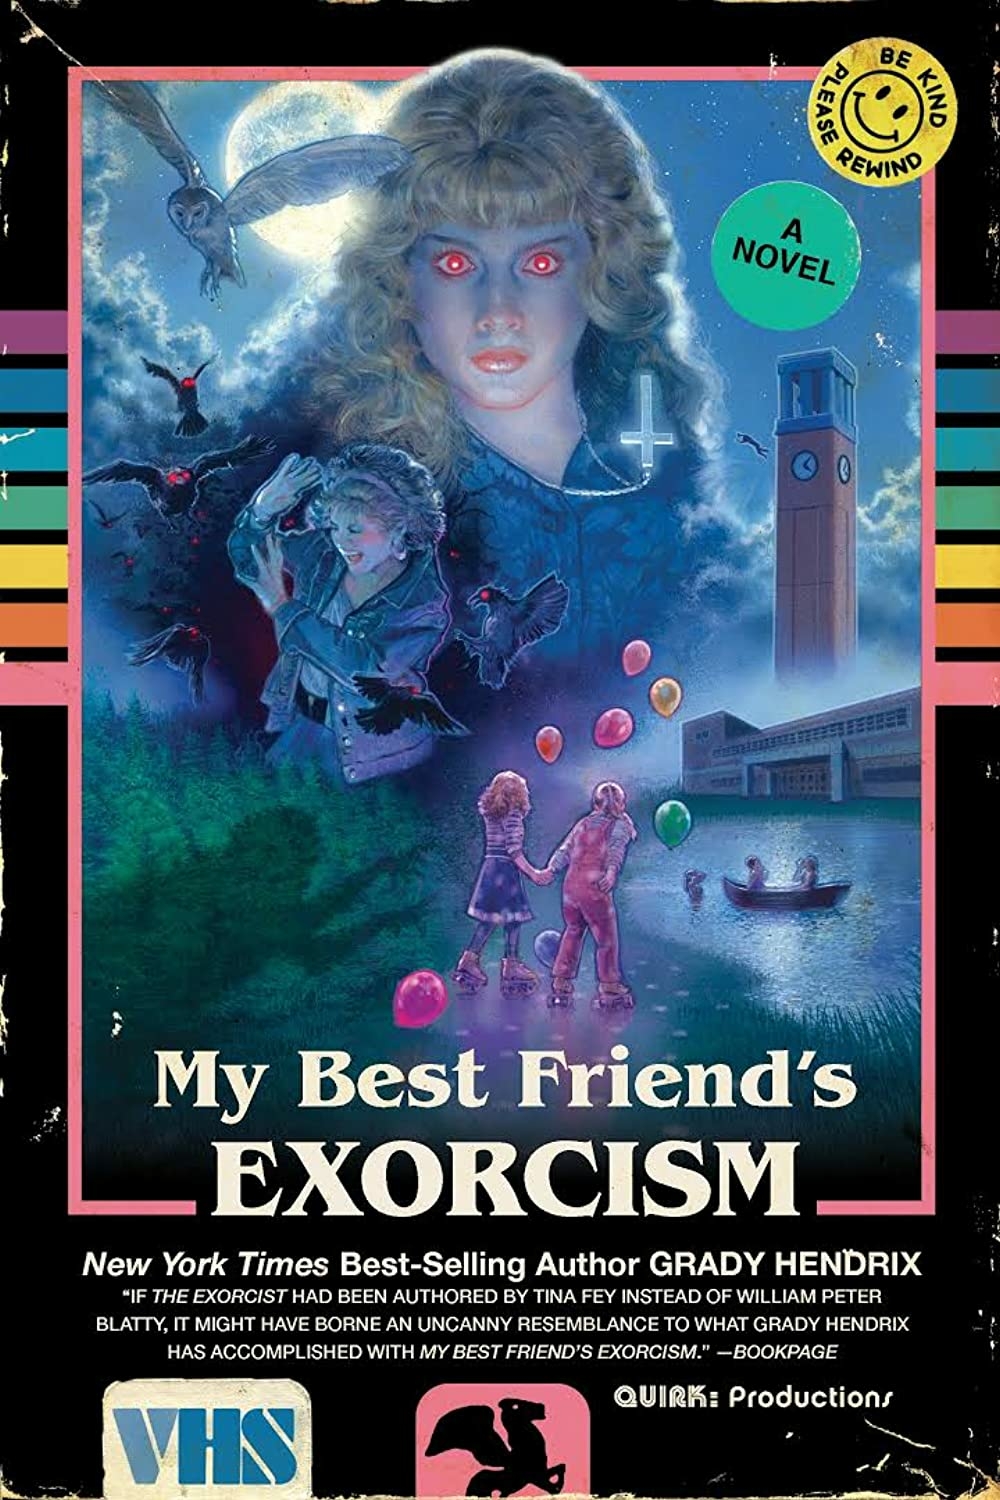 'My Best Friend's Exorcism' Premieres on Amazon Prime Video This Halloween